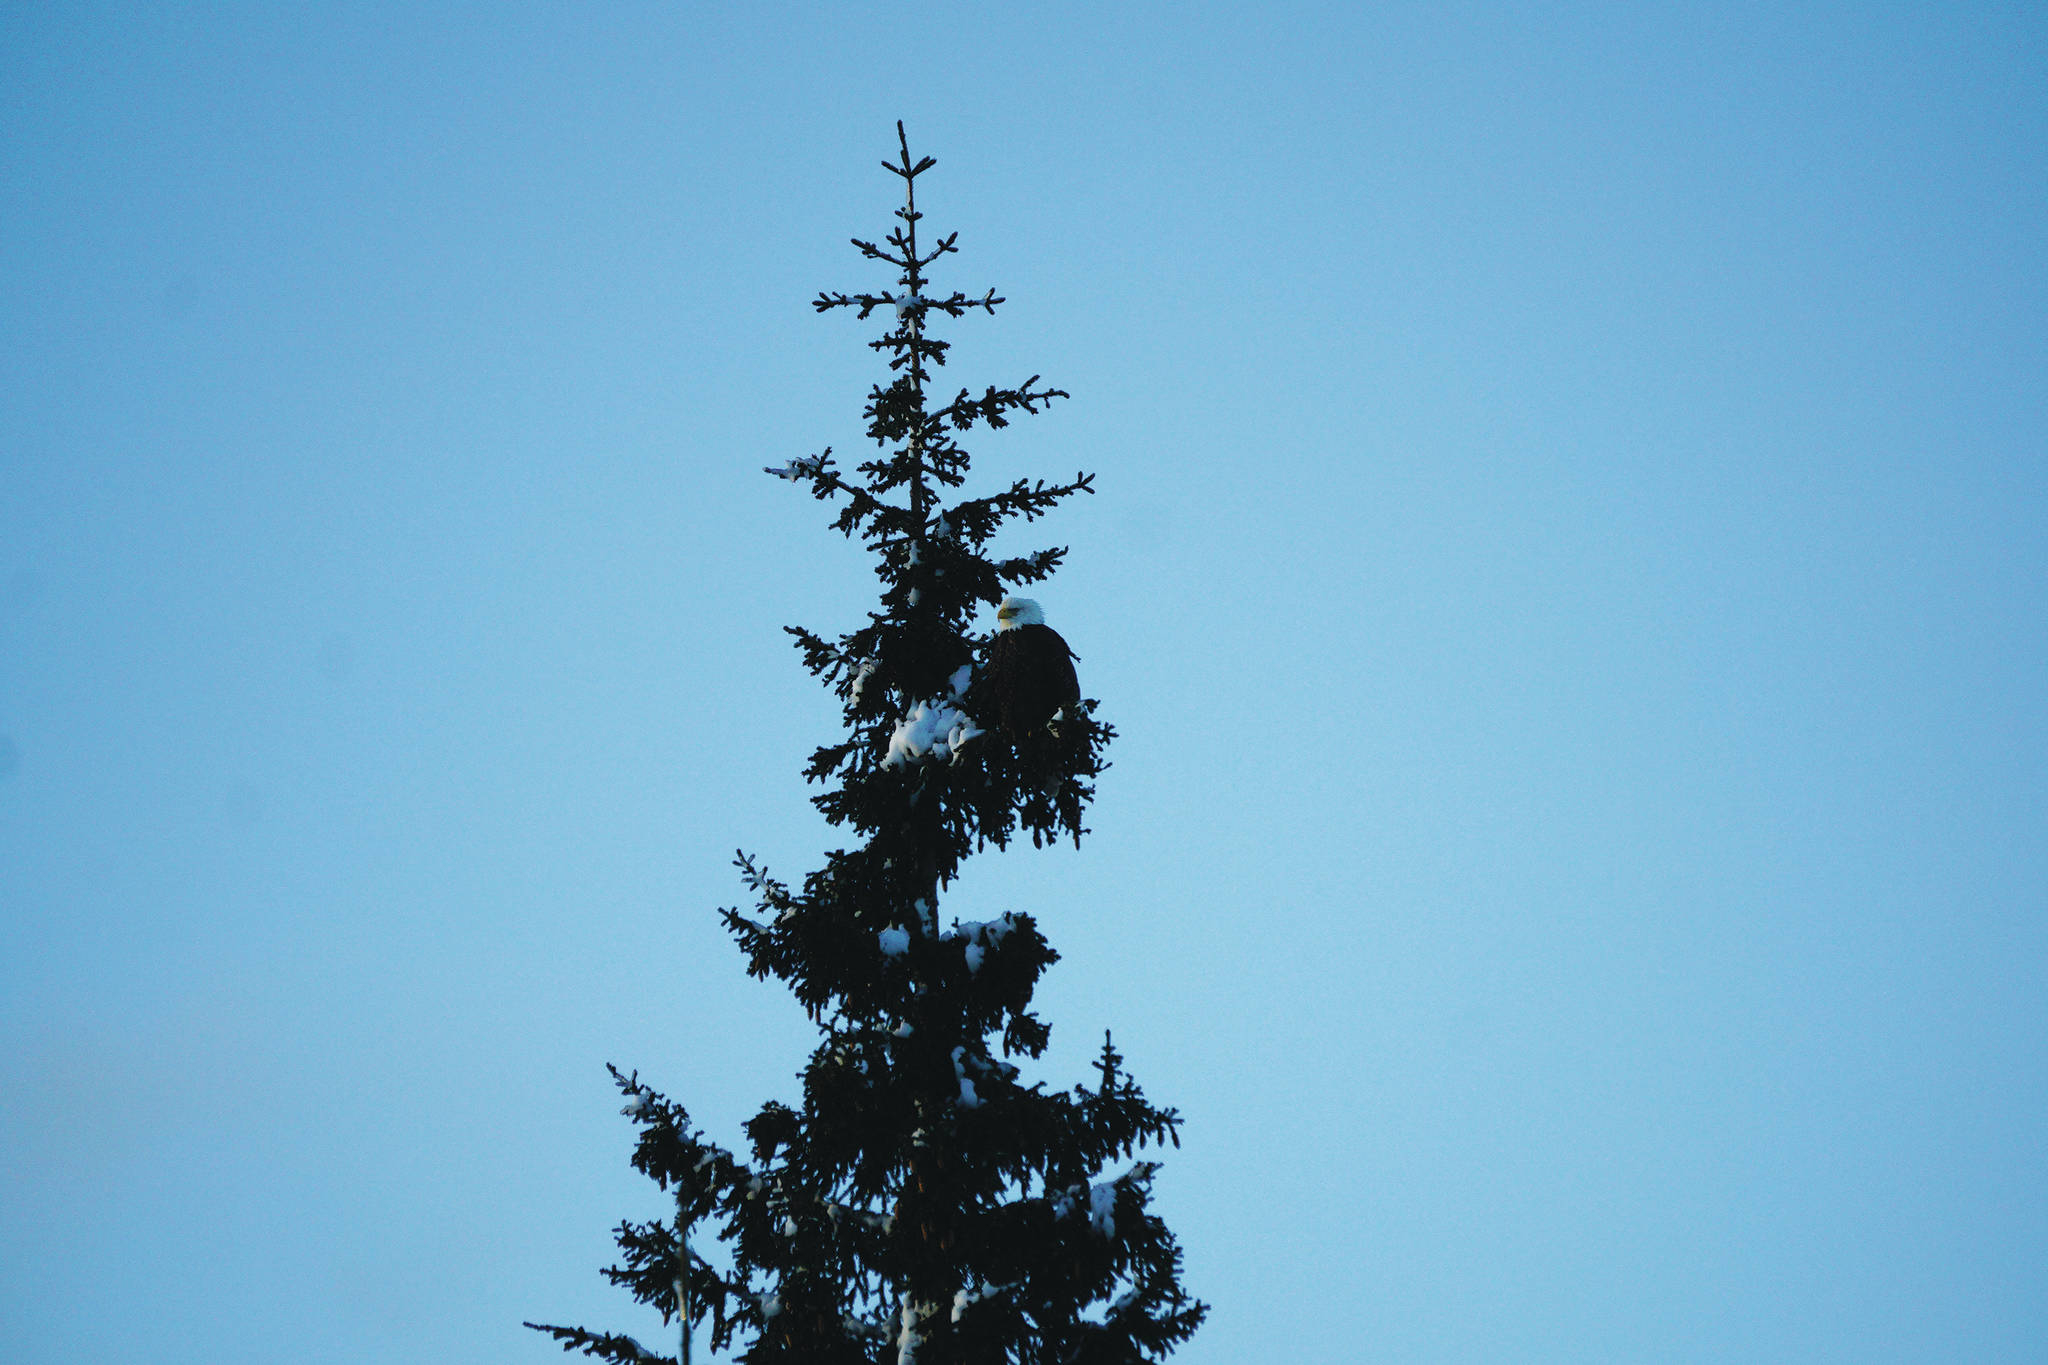 The white of a bald eagle’s head makes perfect camouflage while sitting in a snow covered spruce tree on Jan. 19, 2021, on Diamond Ridge in Homer, Alaska. (Photo by Michael Armstrong/Homer News)